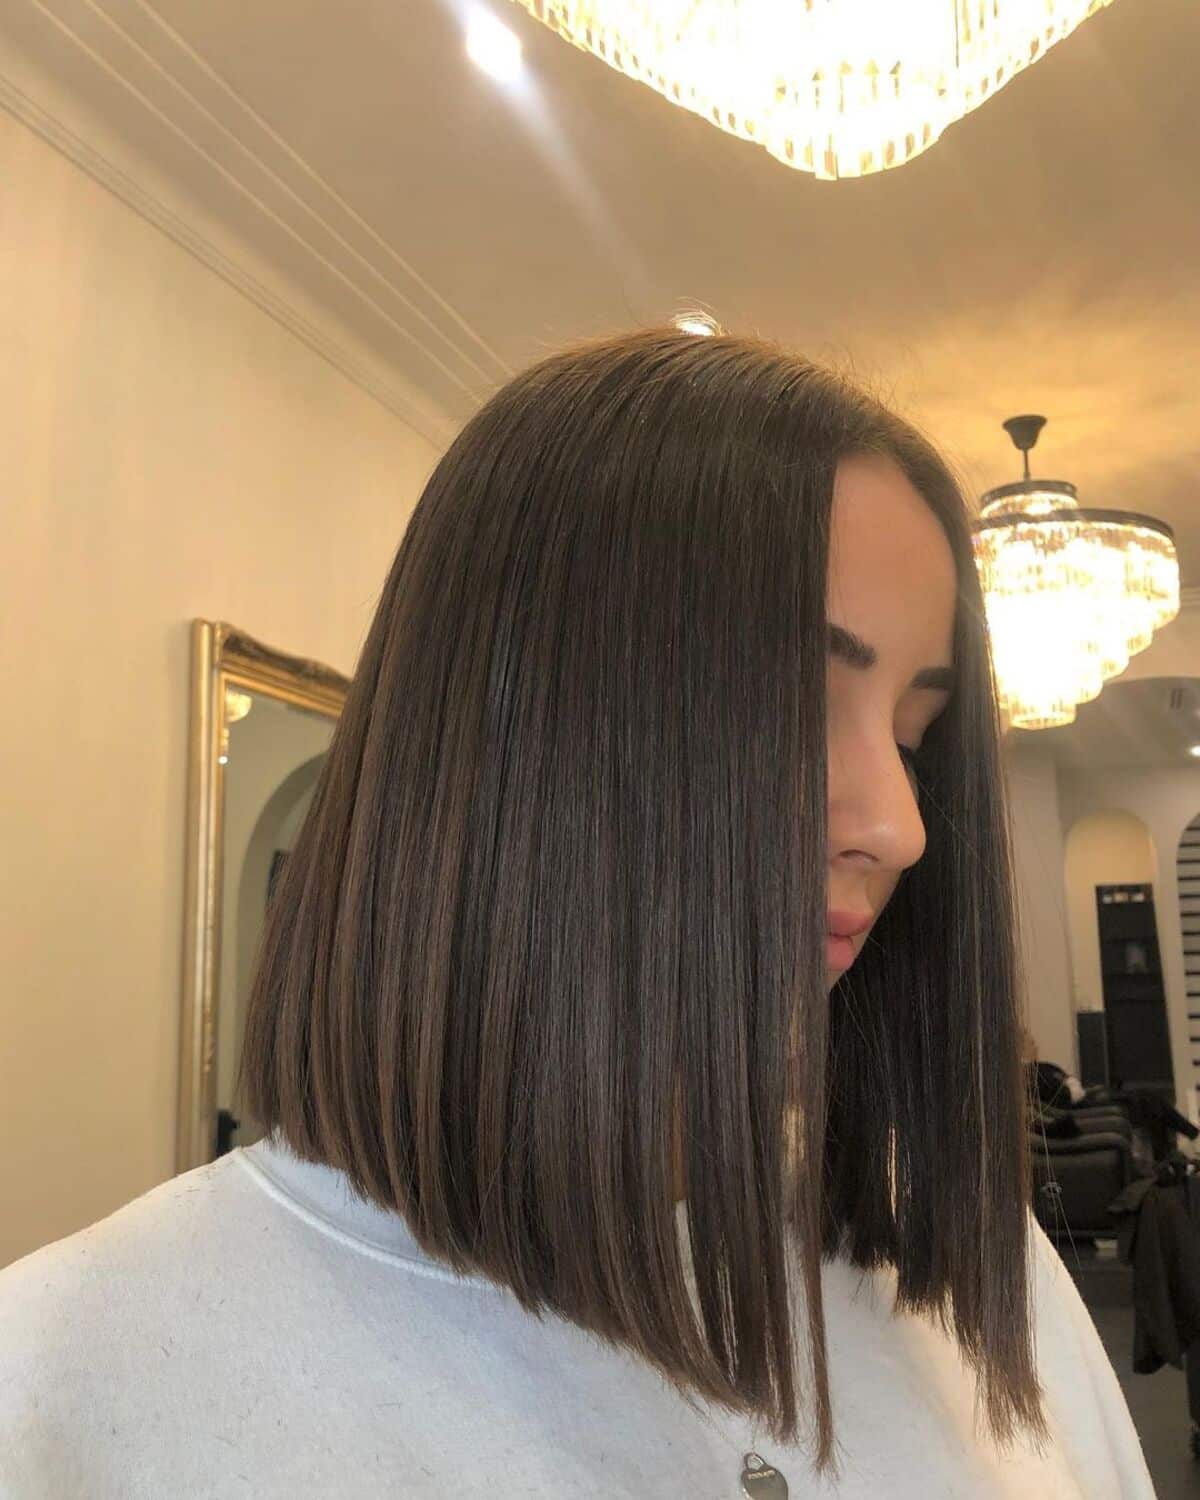 Long Angled Blunt Bob Hairstyle